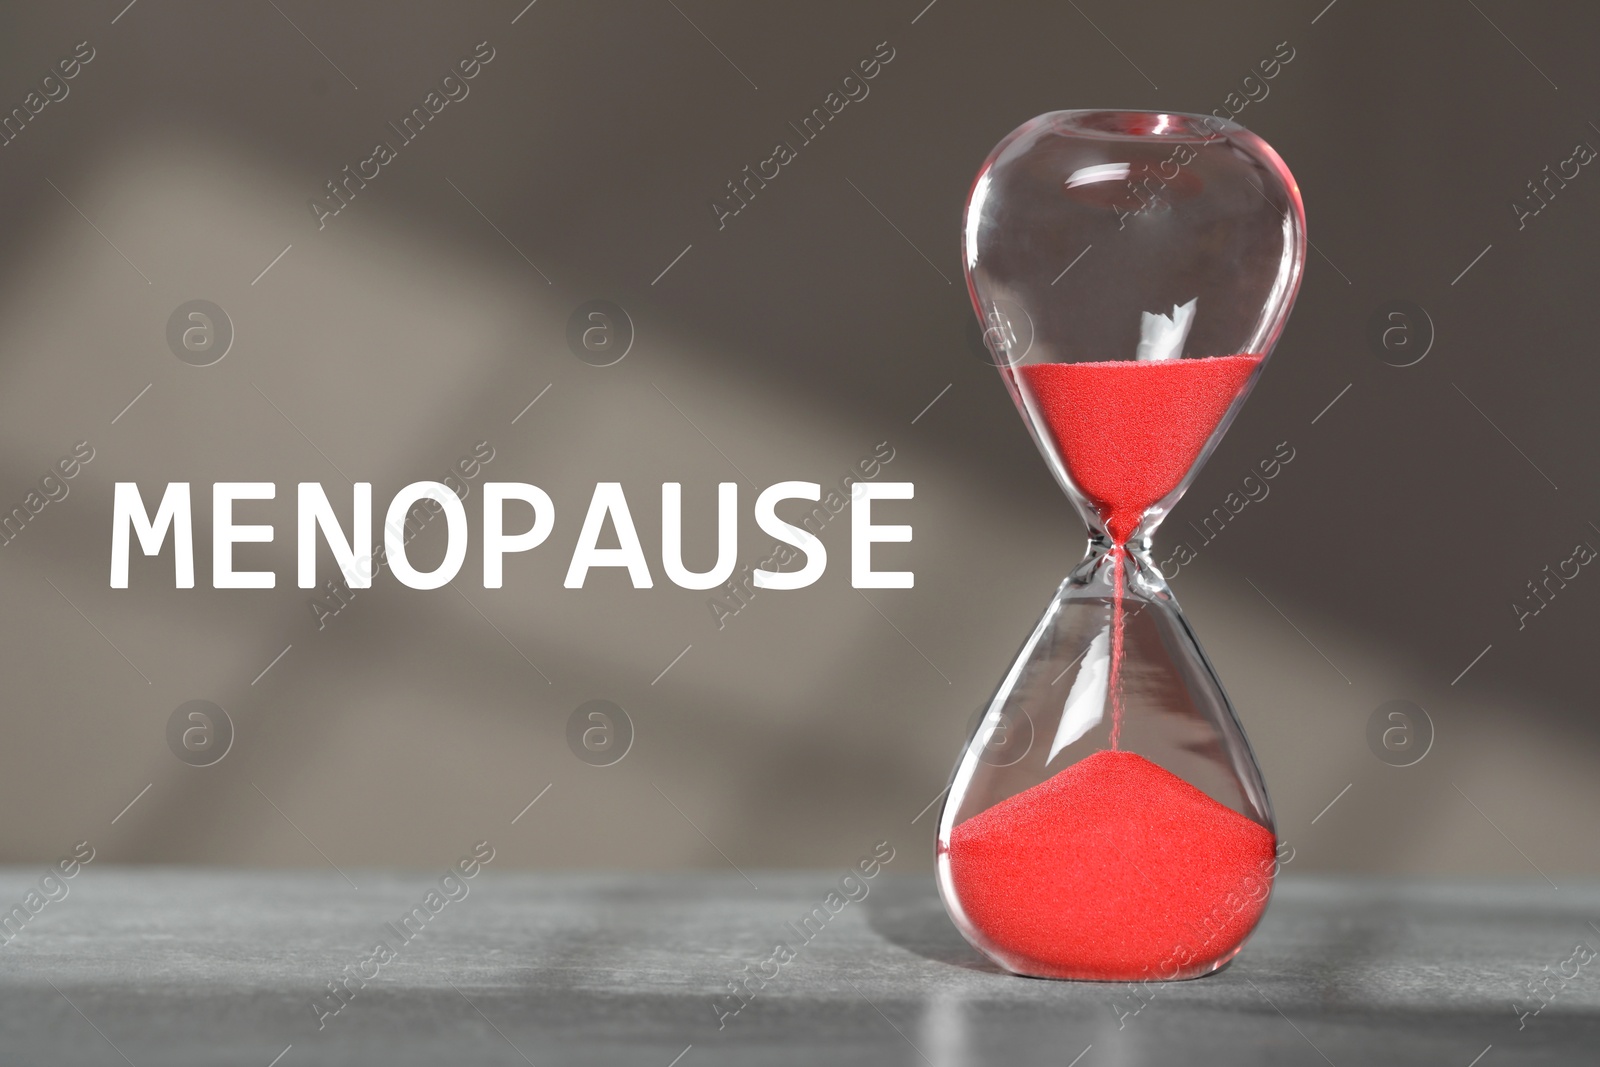 Image of Menopause word and hourglass on table against grey background